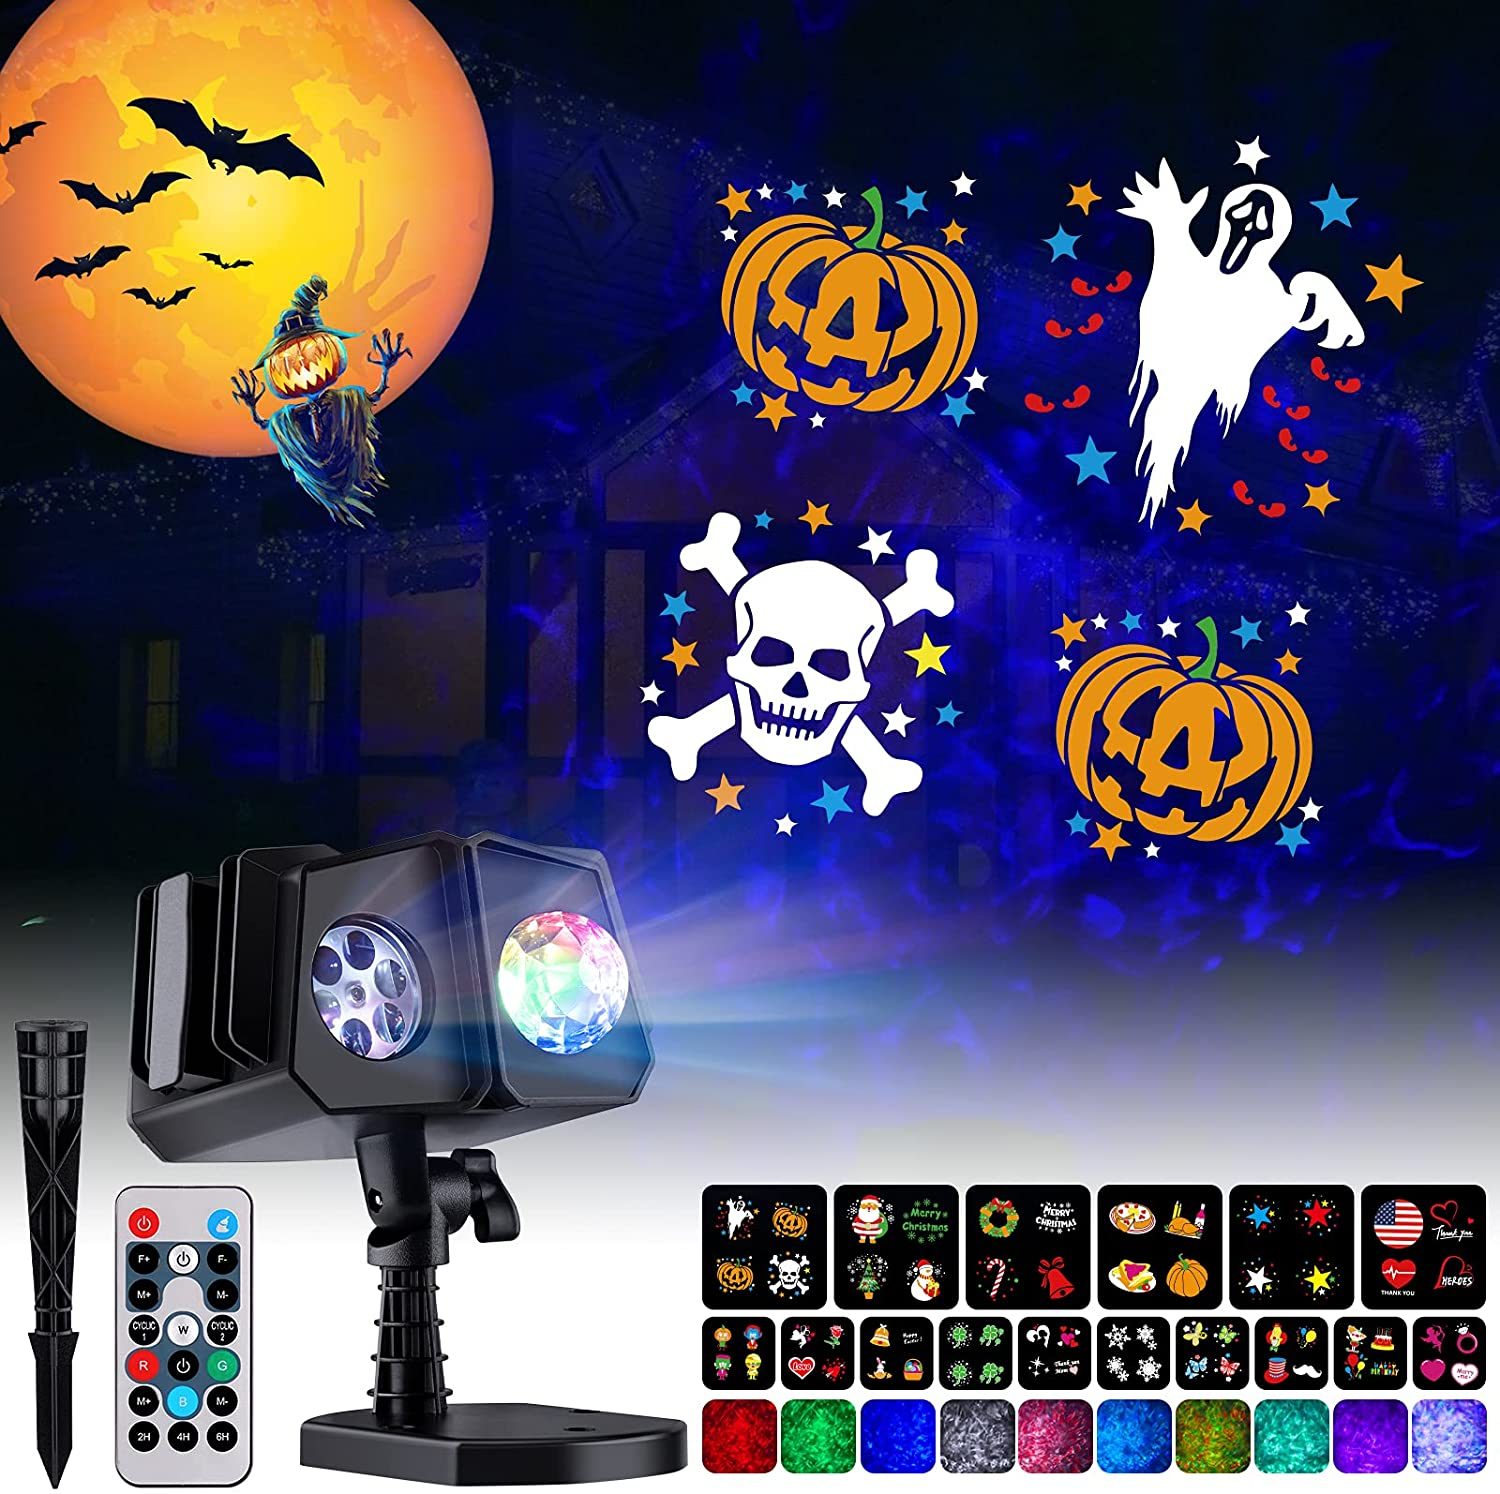 8 Best Halloween Projectors for 2022 | The Family Handyman